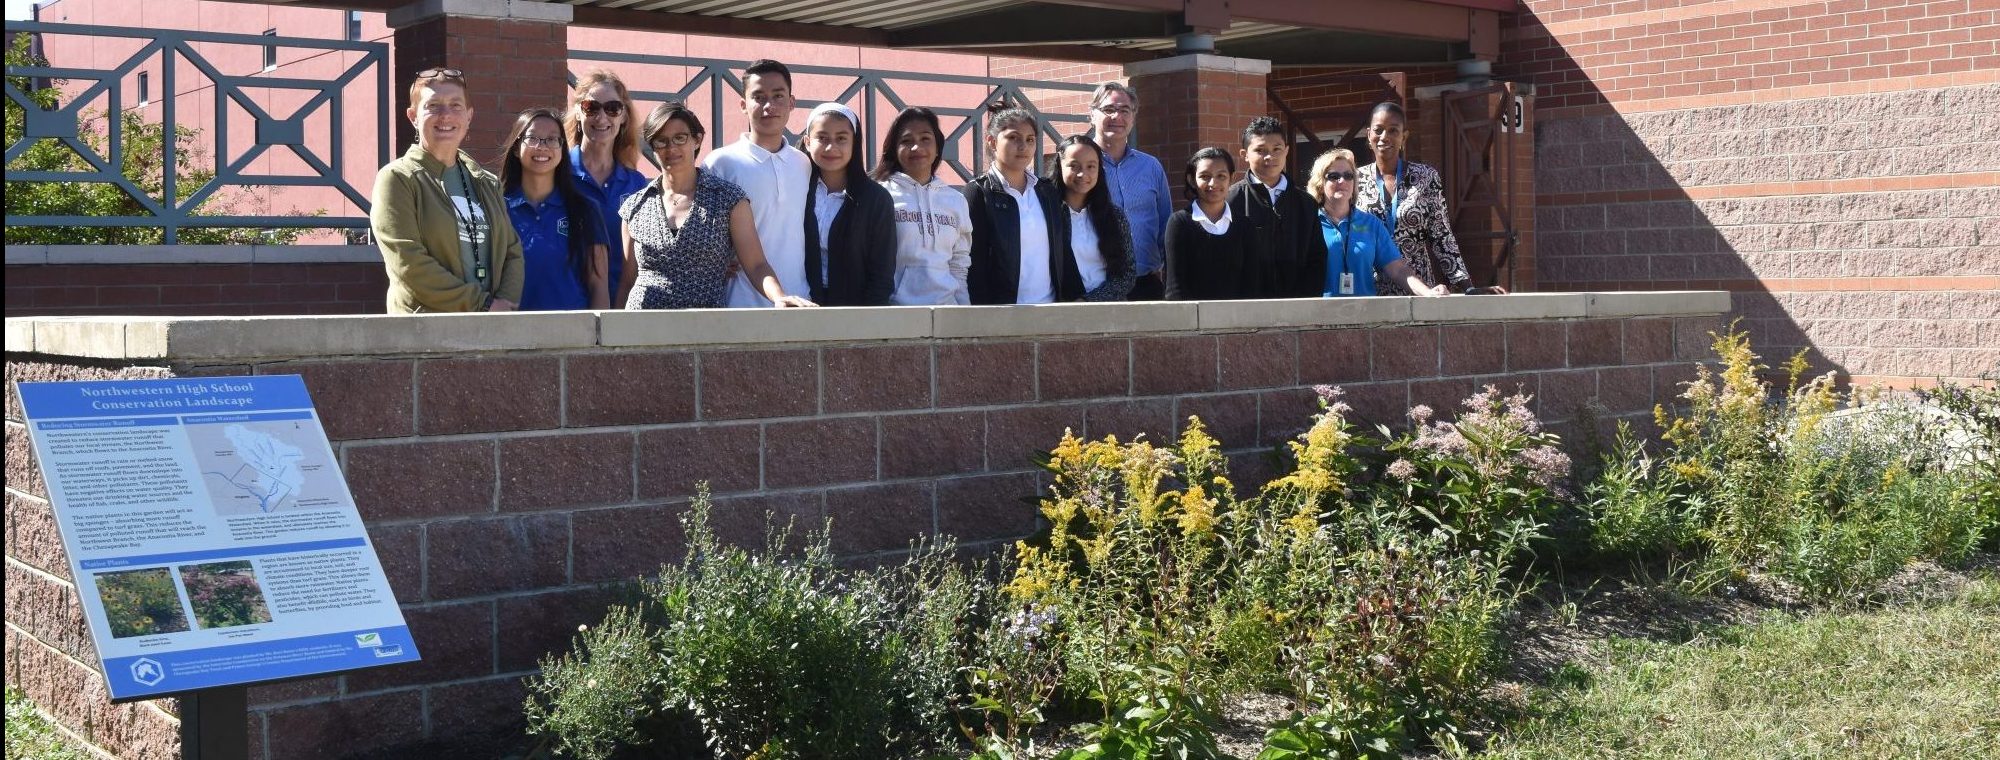 Students and Teachers standing behind a conservation garden.